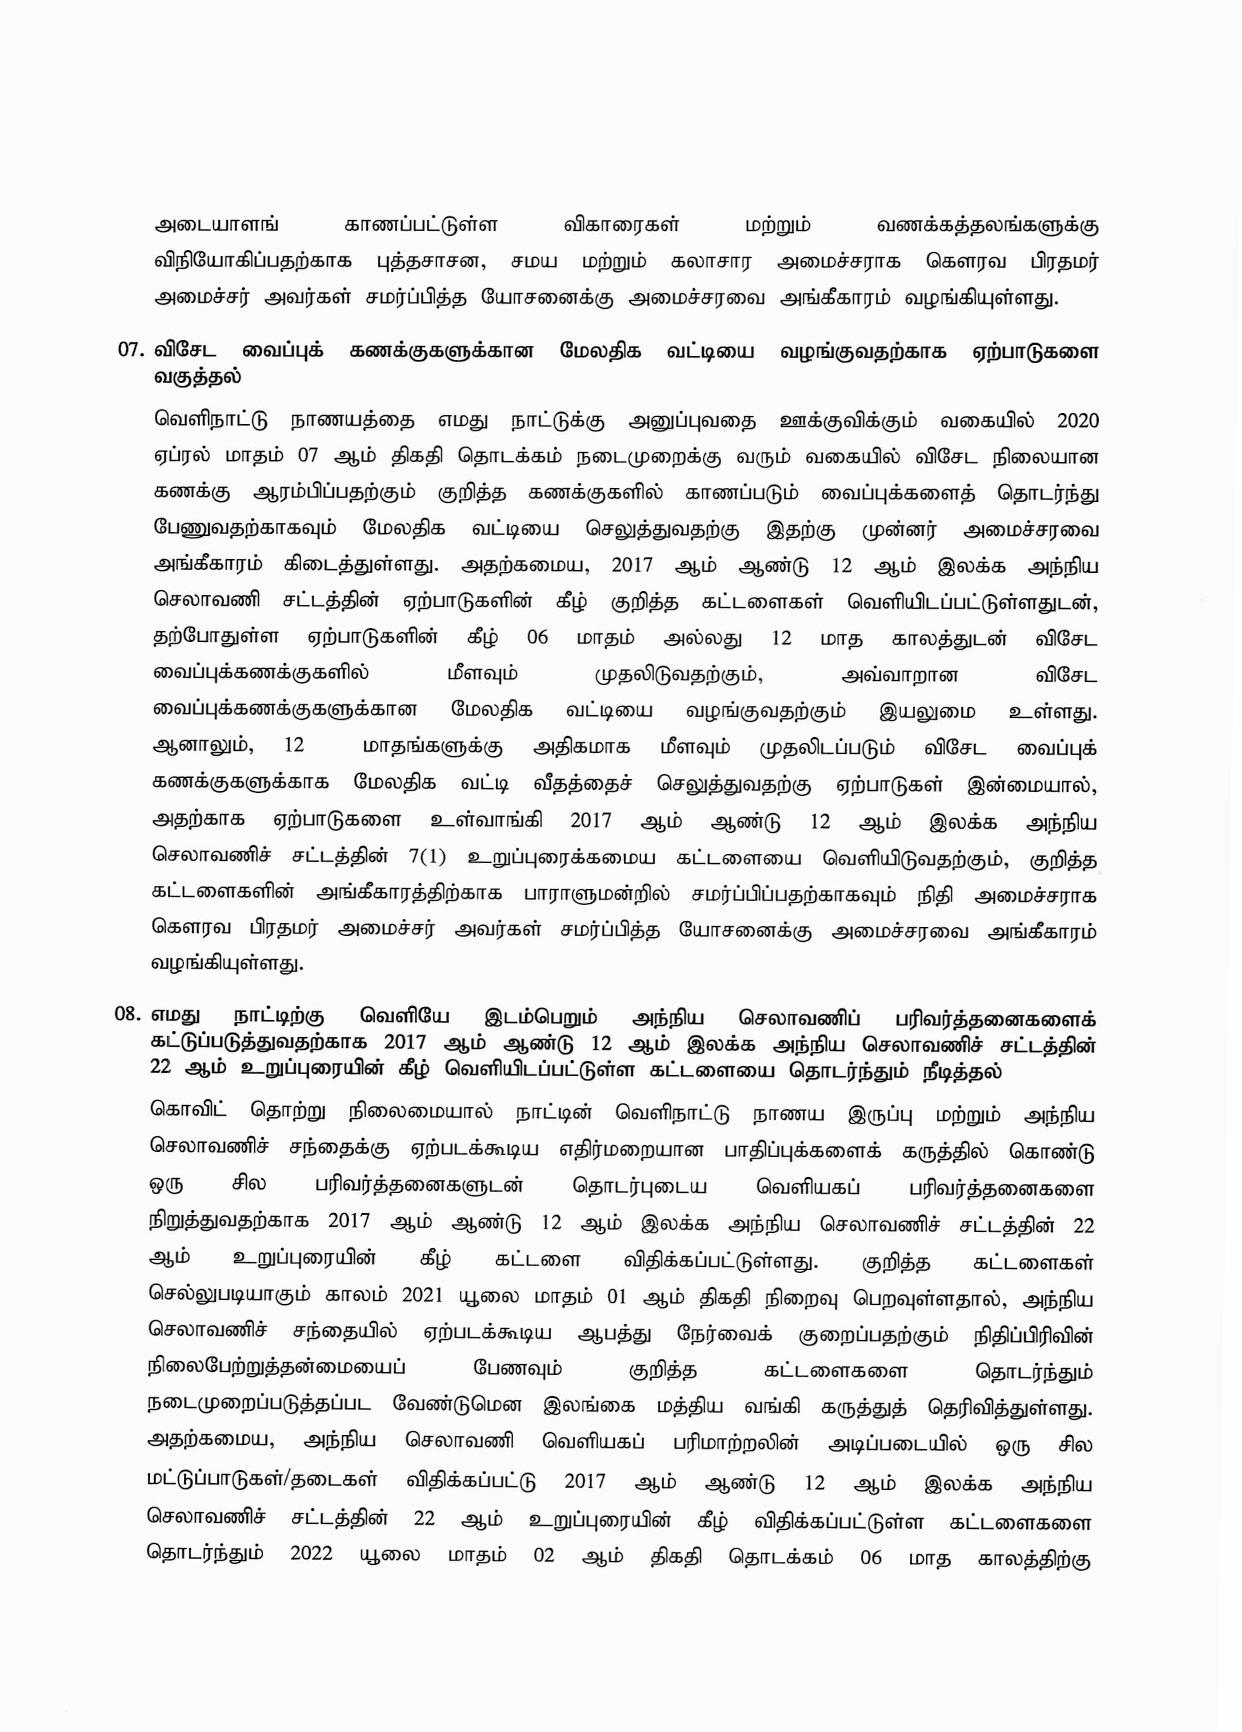 Cabinet Decision on 28.06.2021 Tamil page 004